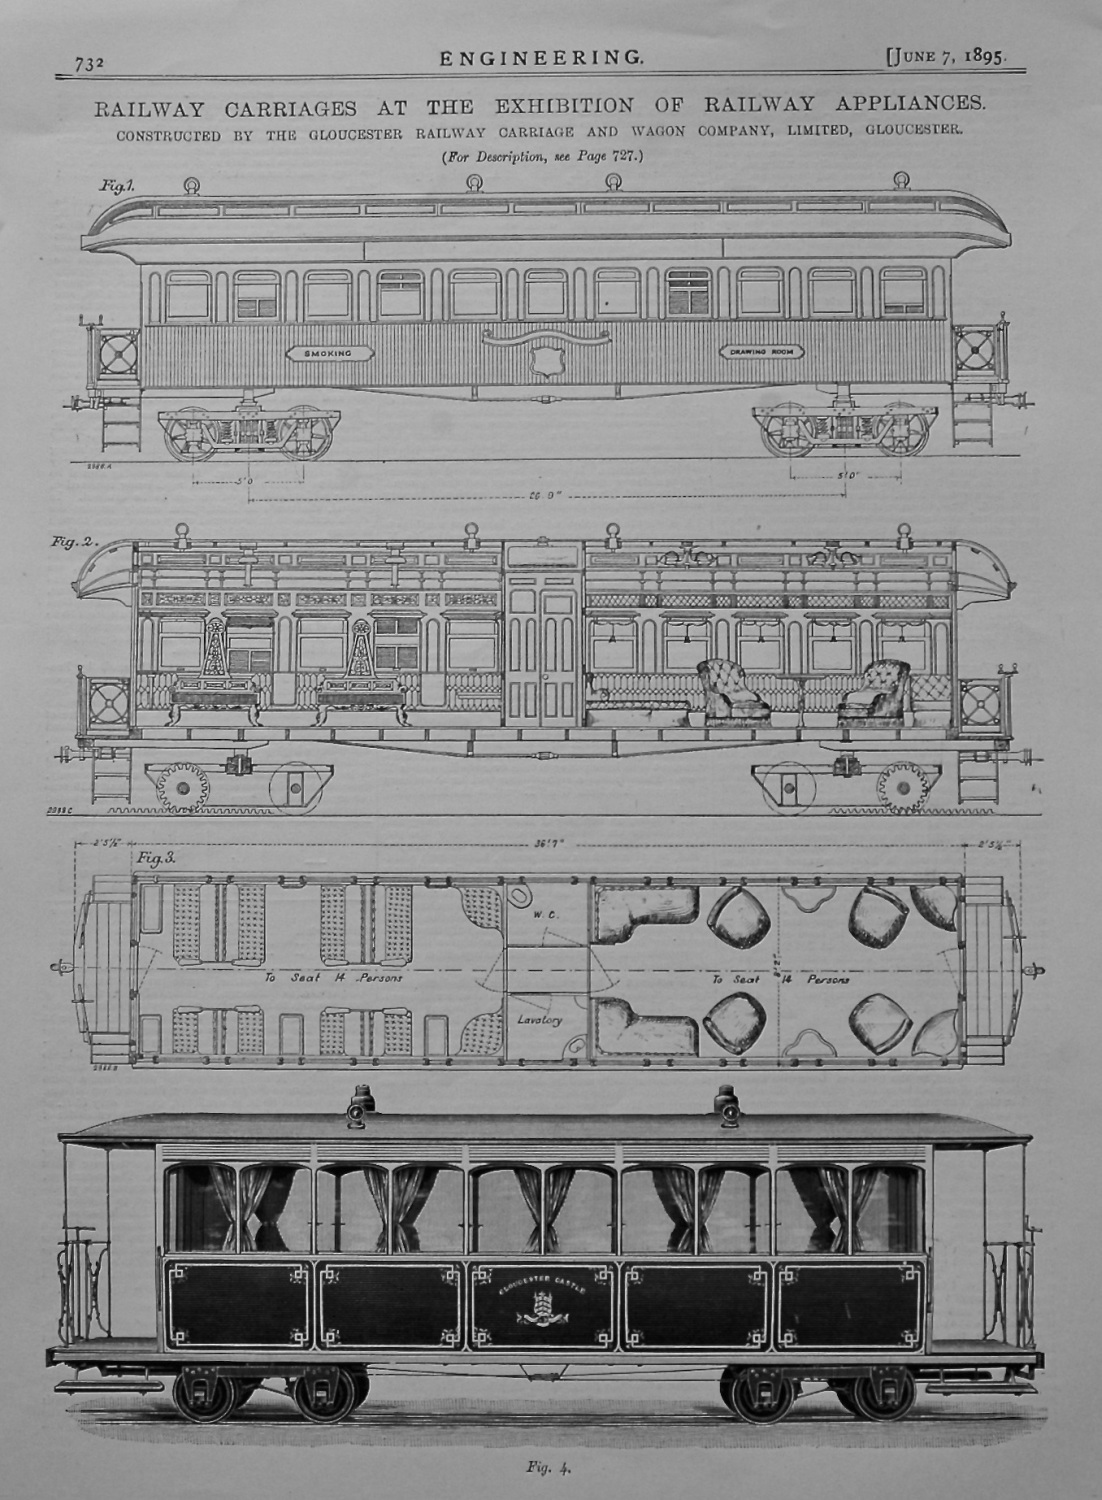 Railway Carriages at the Exhibition of Railway Appliances. 1895.